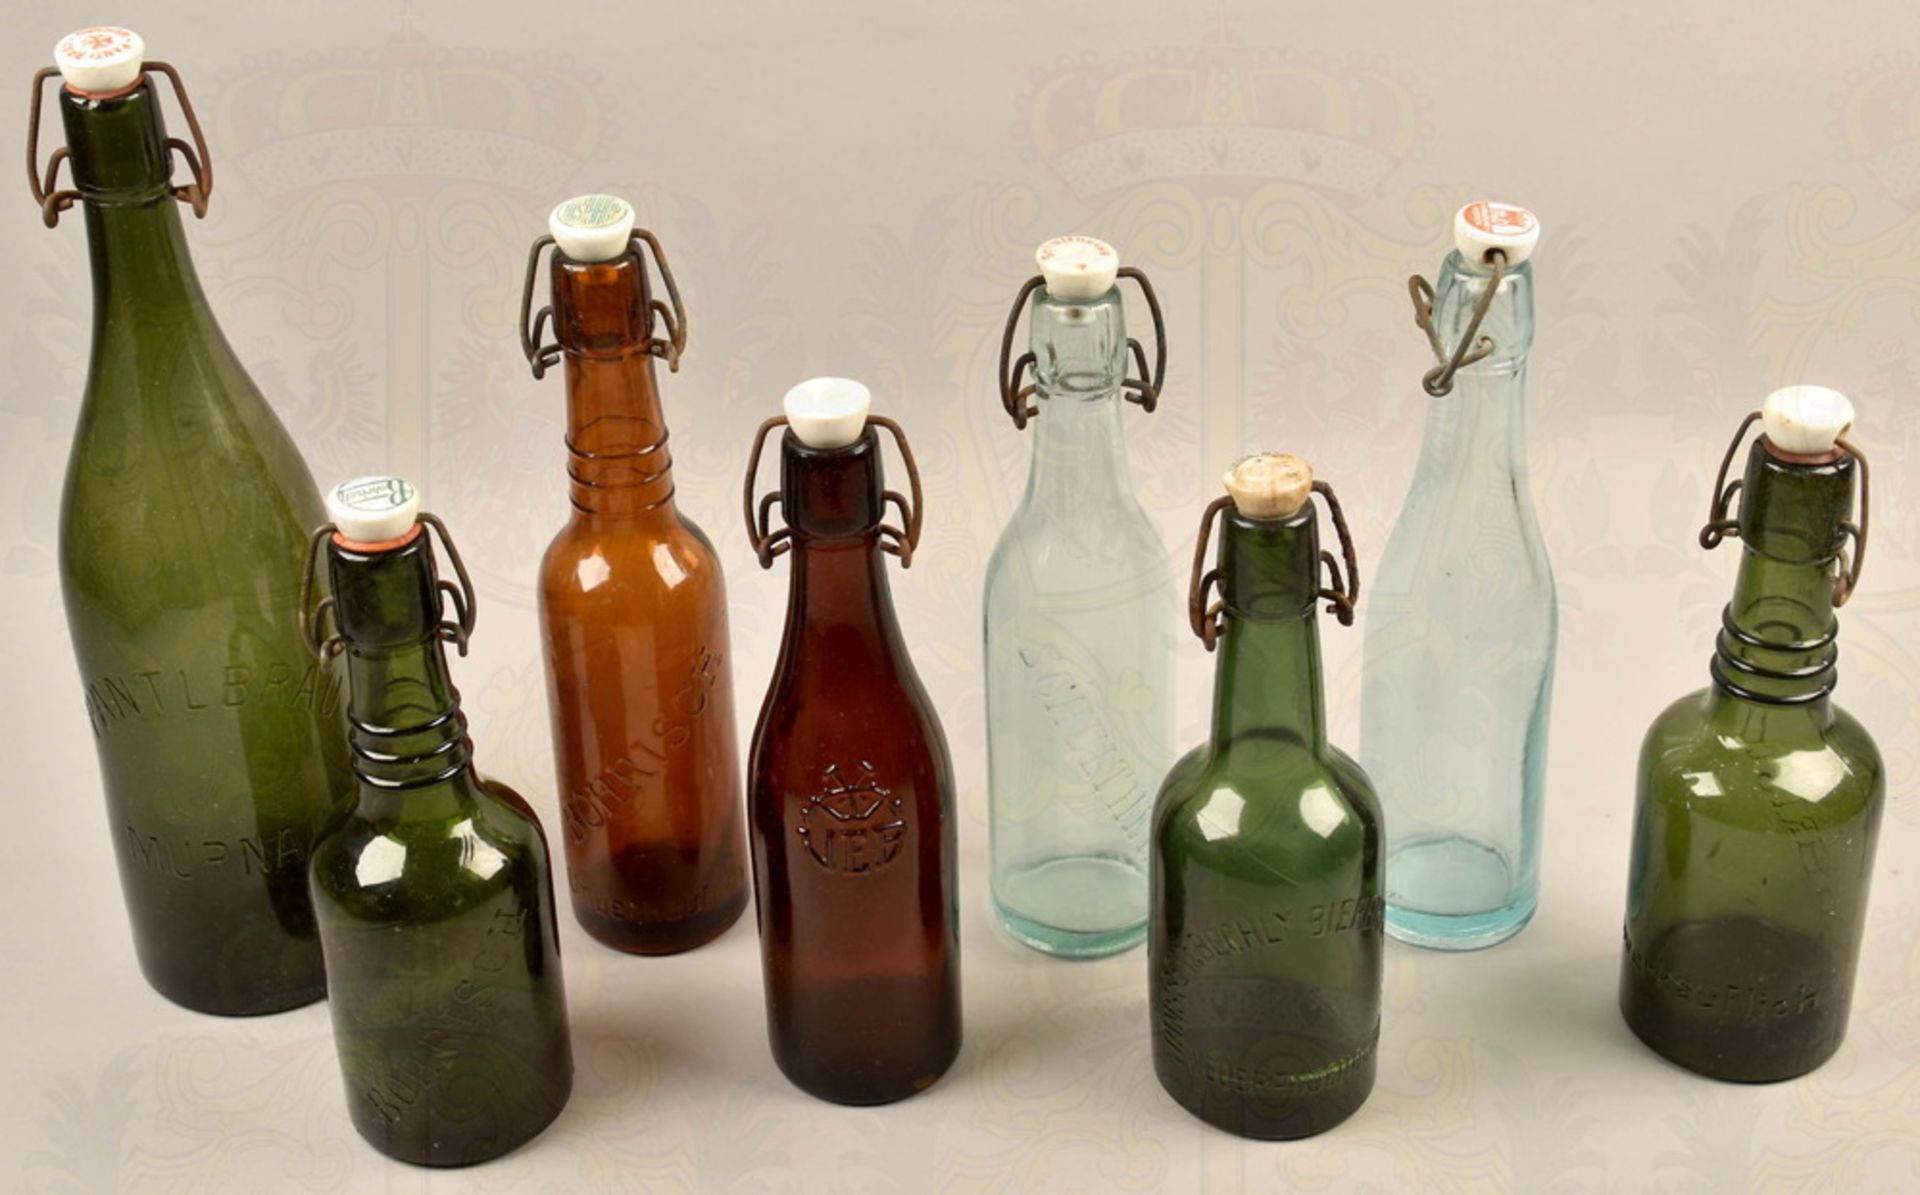 8 German glass bottles with porcelain caps 1920s-1950s